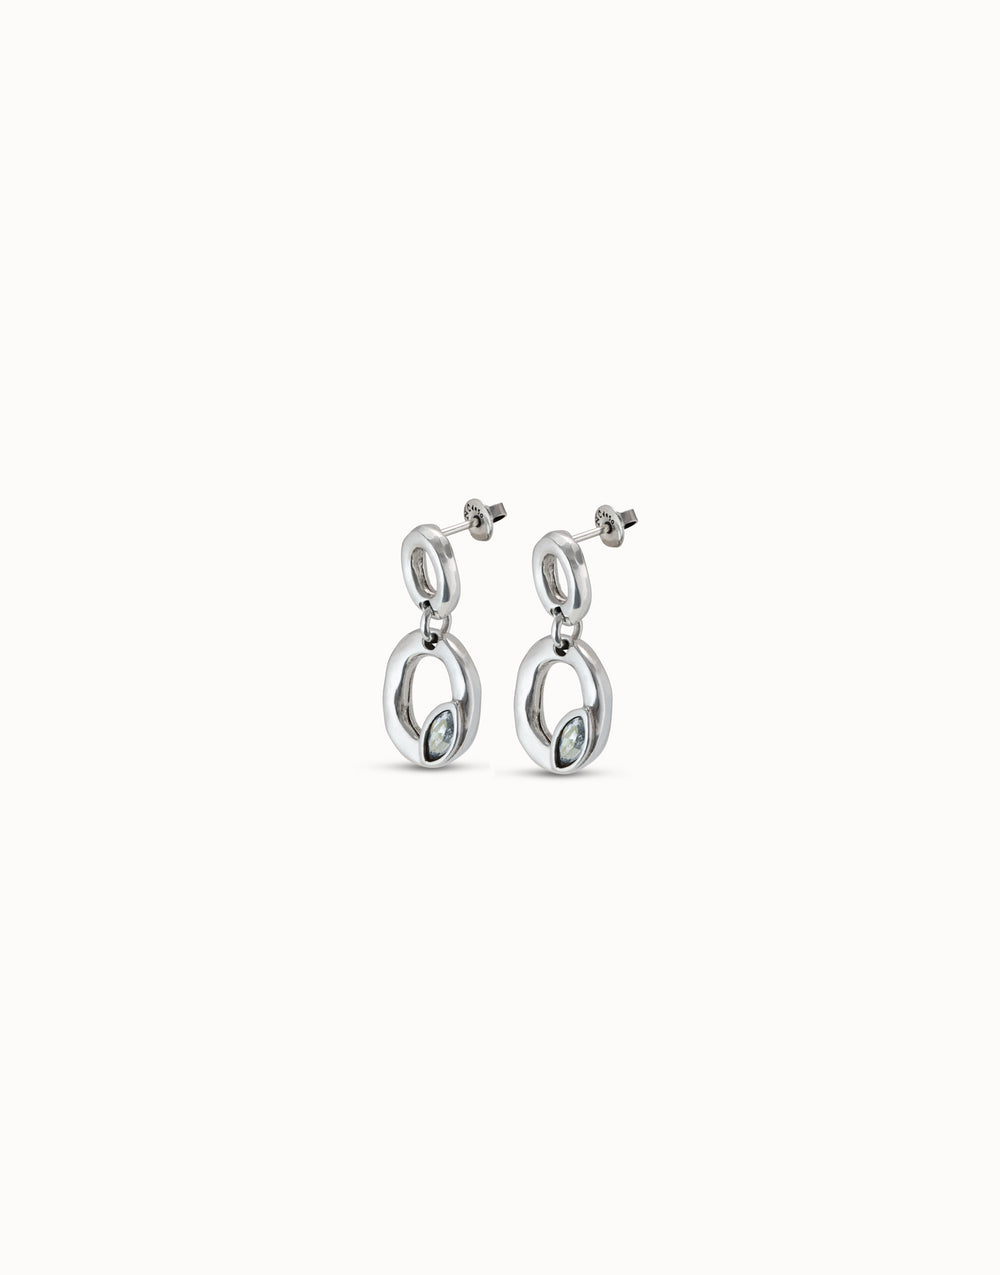 TOGETHER EARRINGS-SILVER - Kingfisher Road - Online Boutique